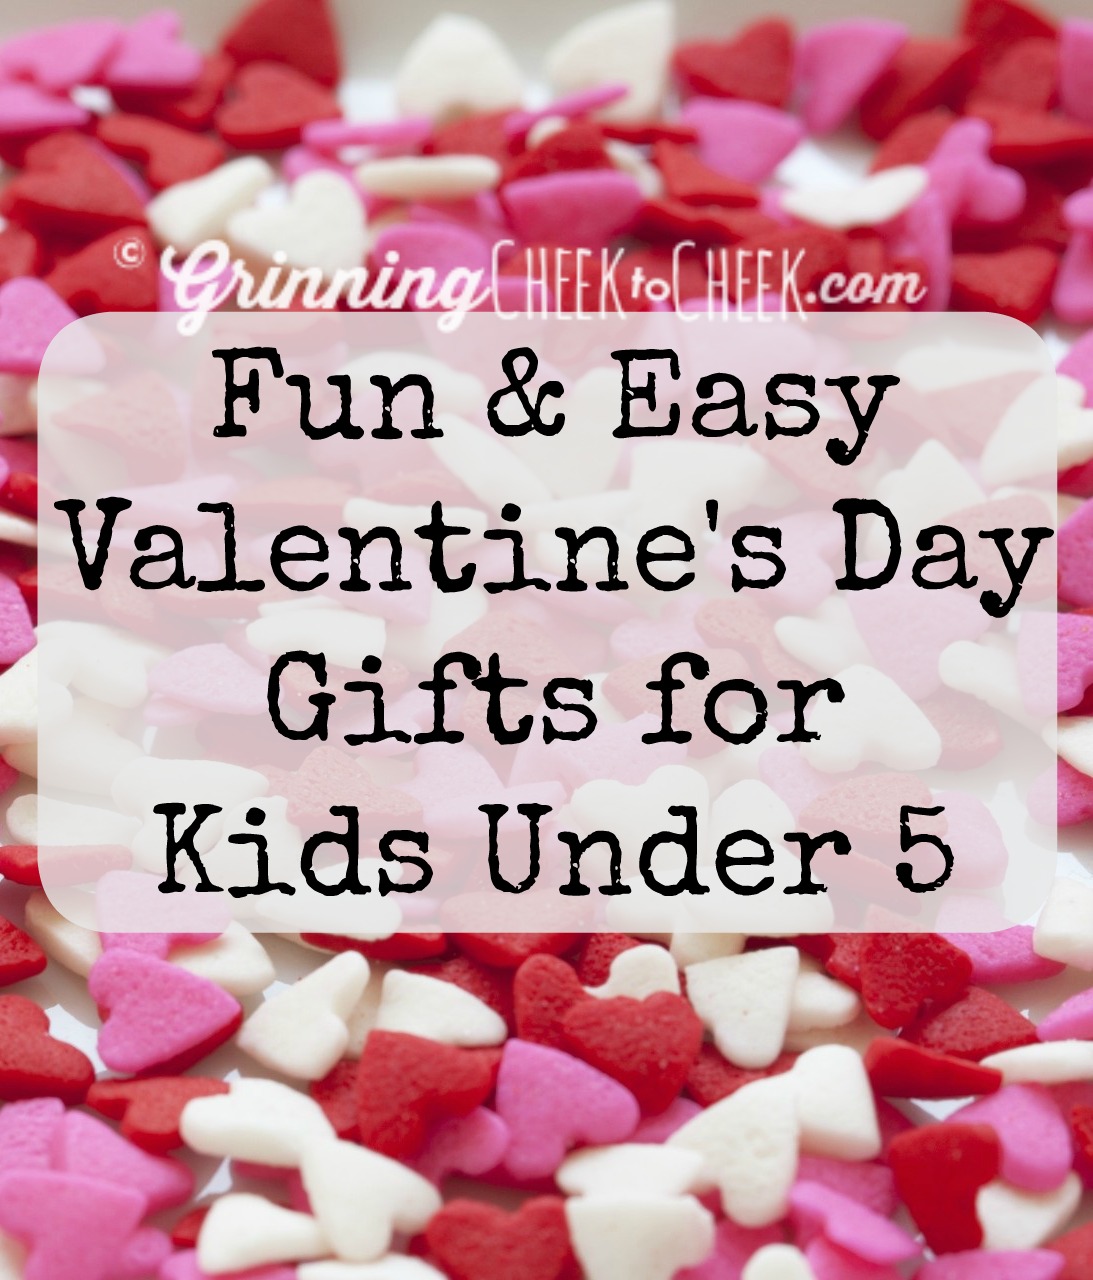 Fun and Easy Valentine’s Day Gifts for Kids under 5 #Gifts #vday #Love